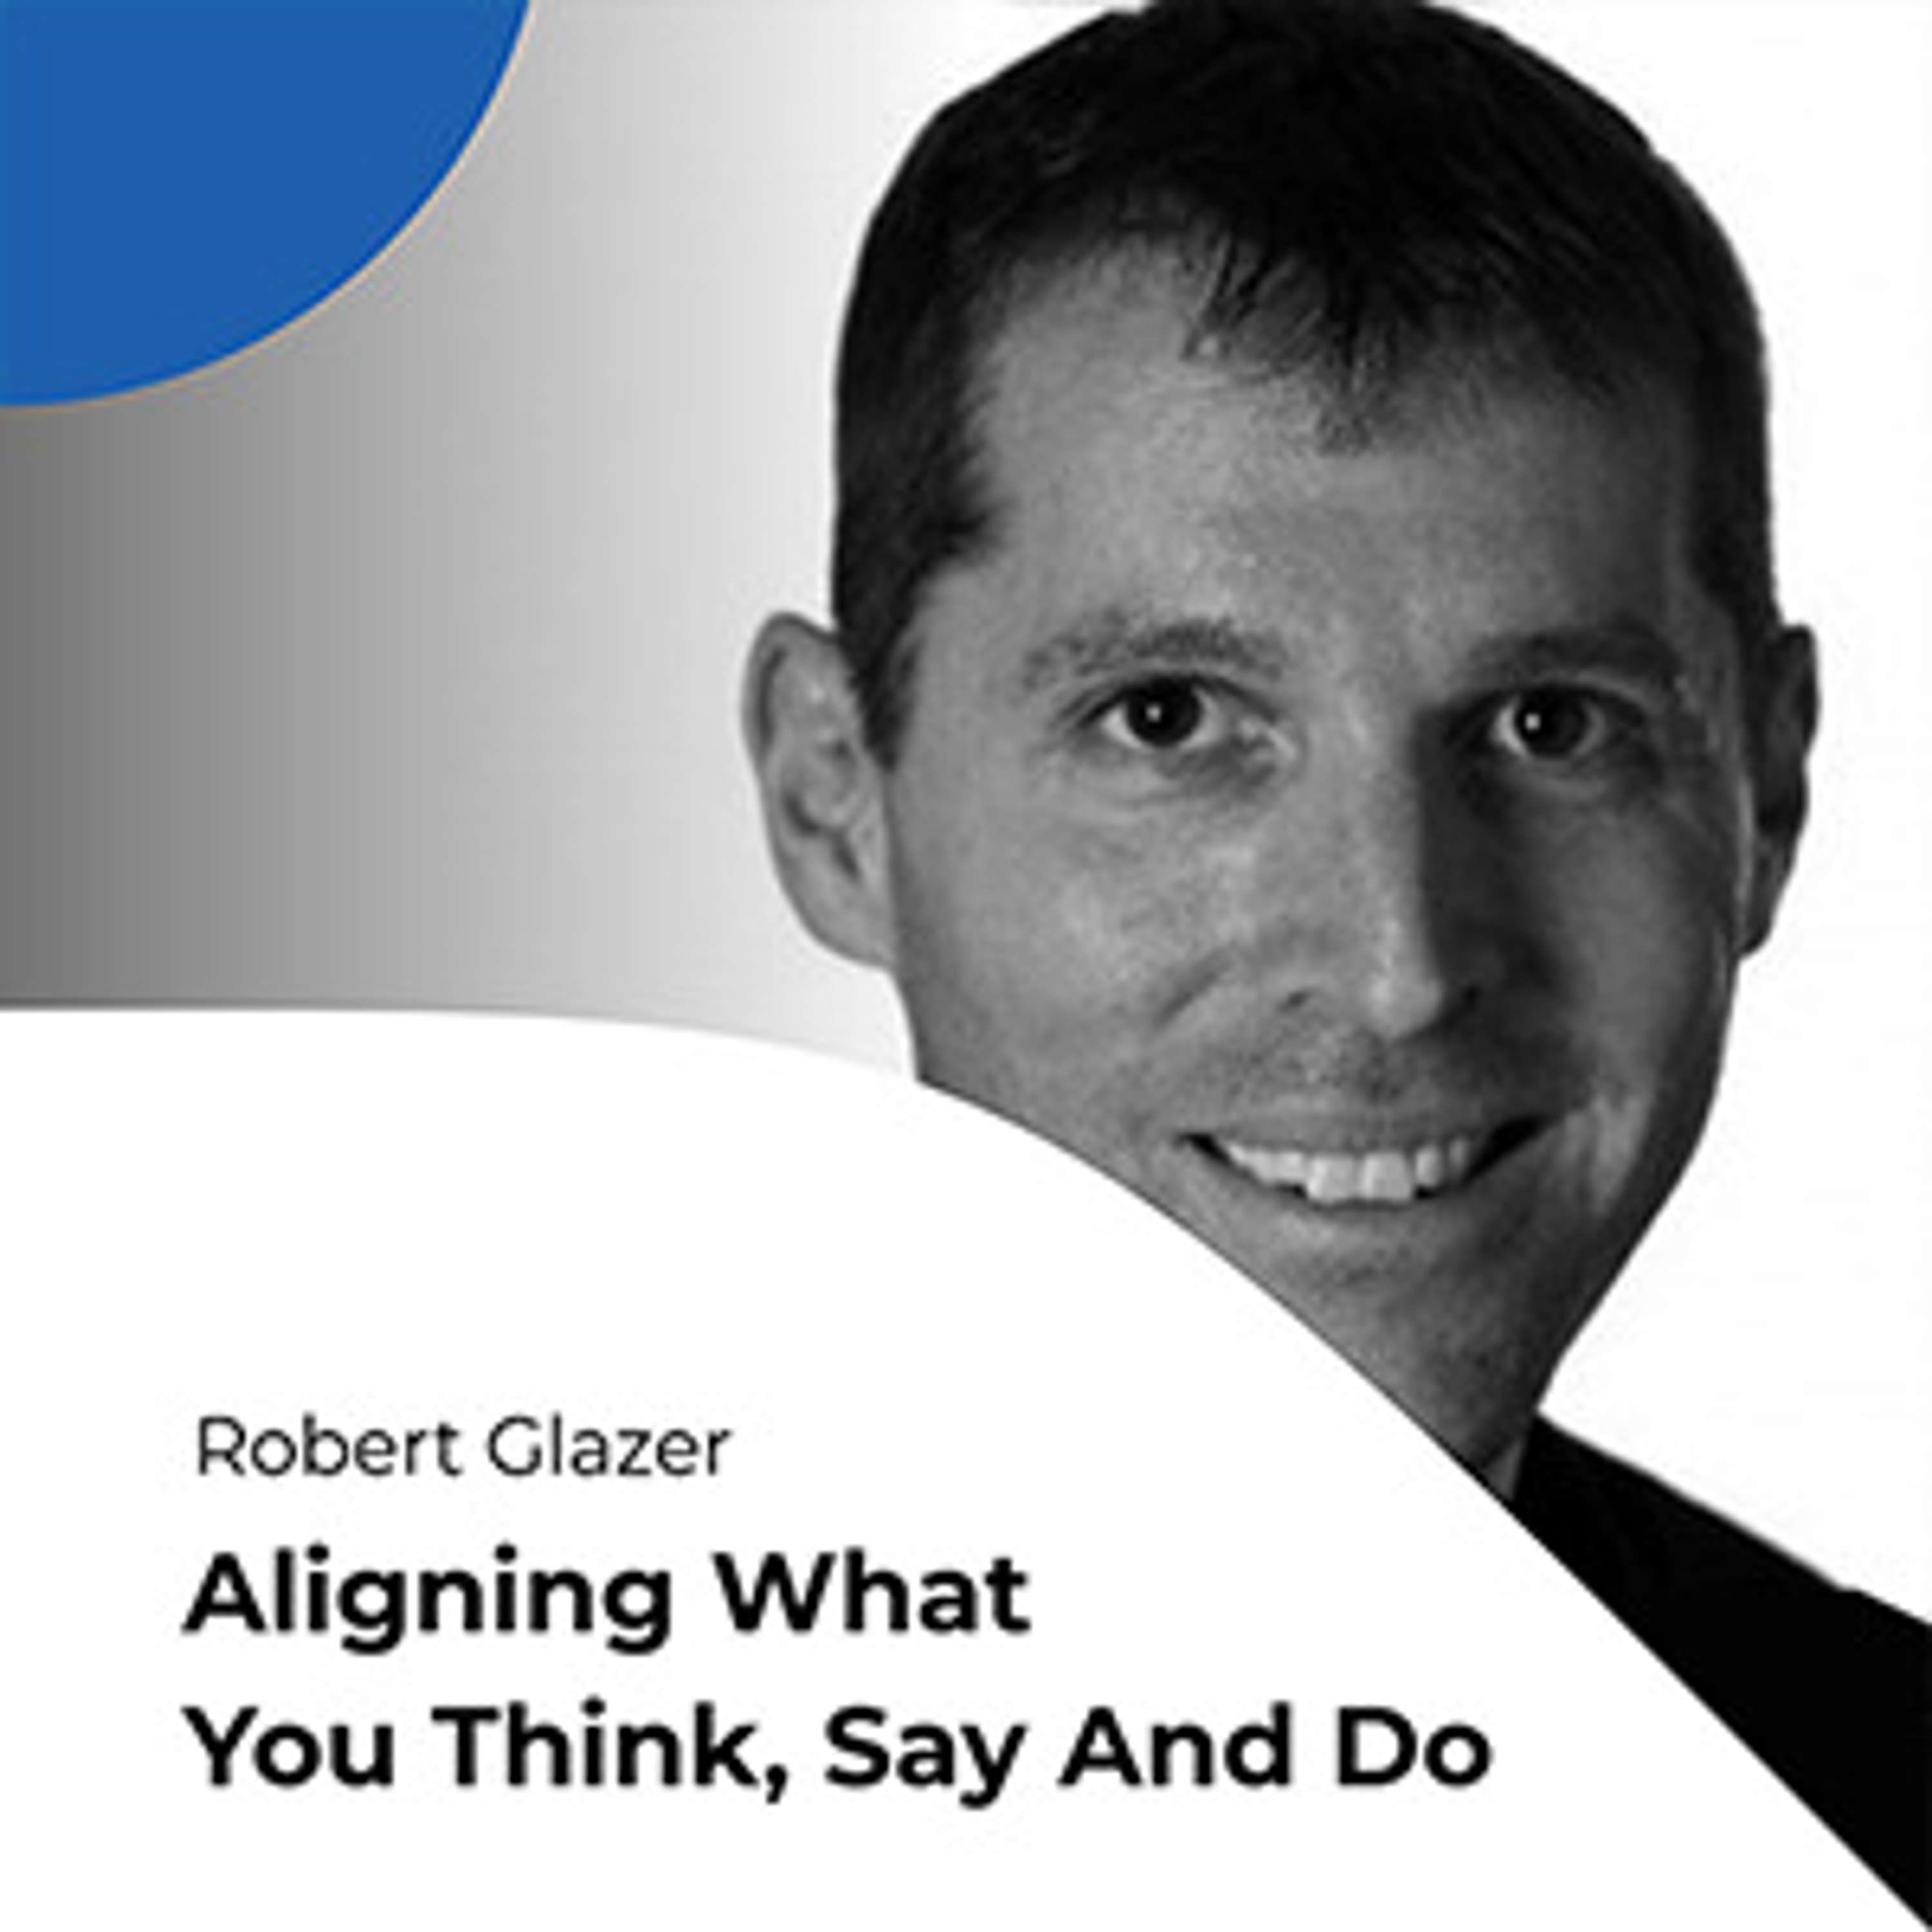 S01E10 Aligning what you think, say and do: Where culture meets values with Robert Glazer